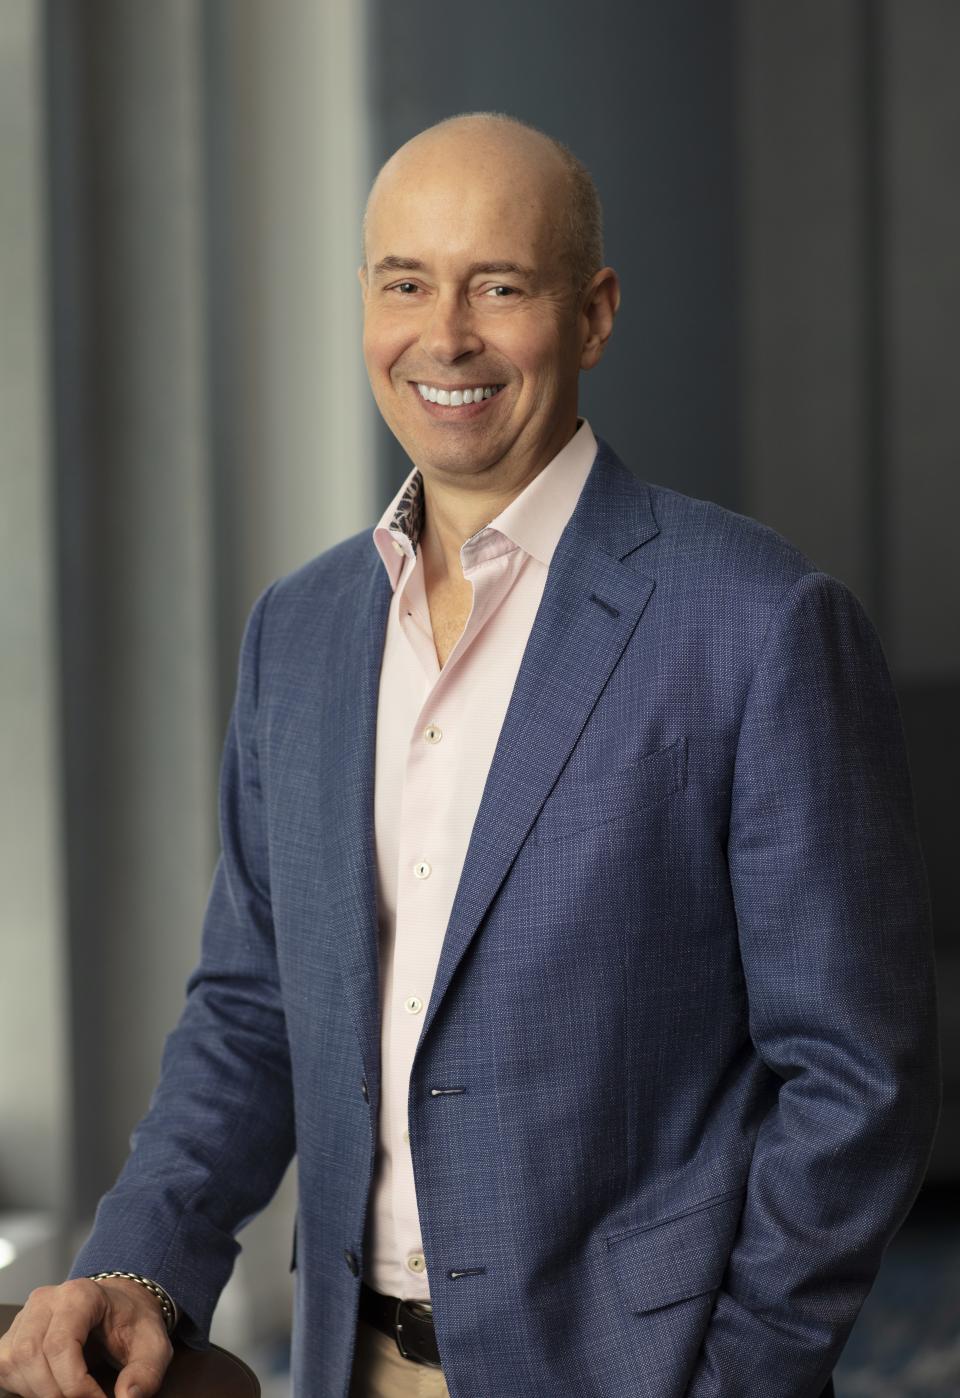 Klein, who is currently executive vice president and chief financial officer at Constellation and serves as Canopy’s chair, will assume his new role Jan. 14. (Constellation Brands bio page)